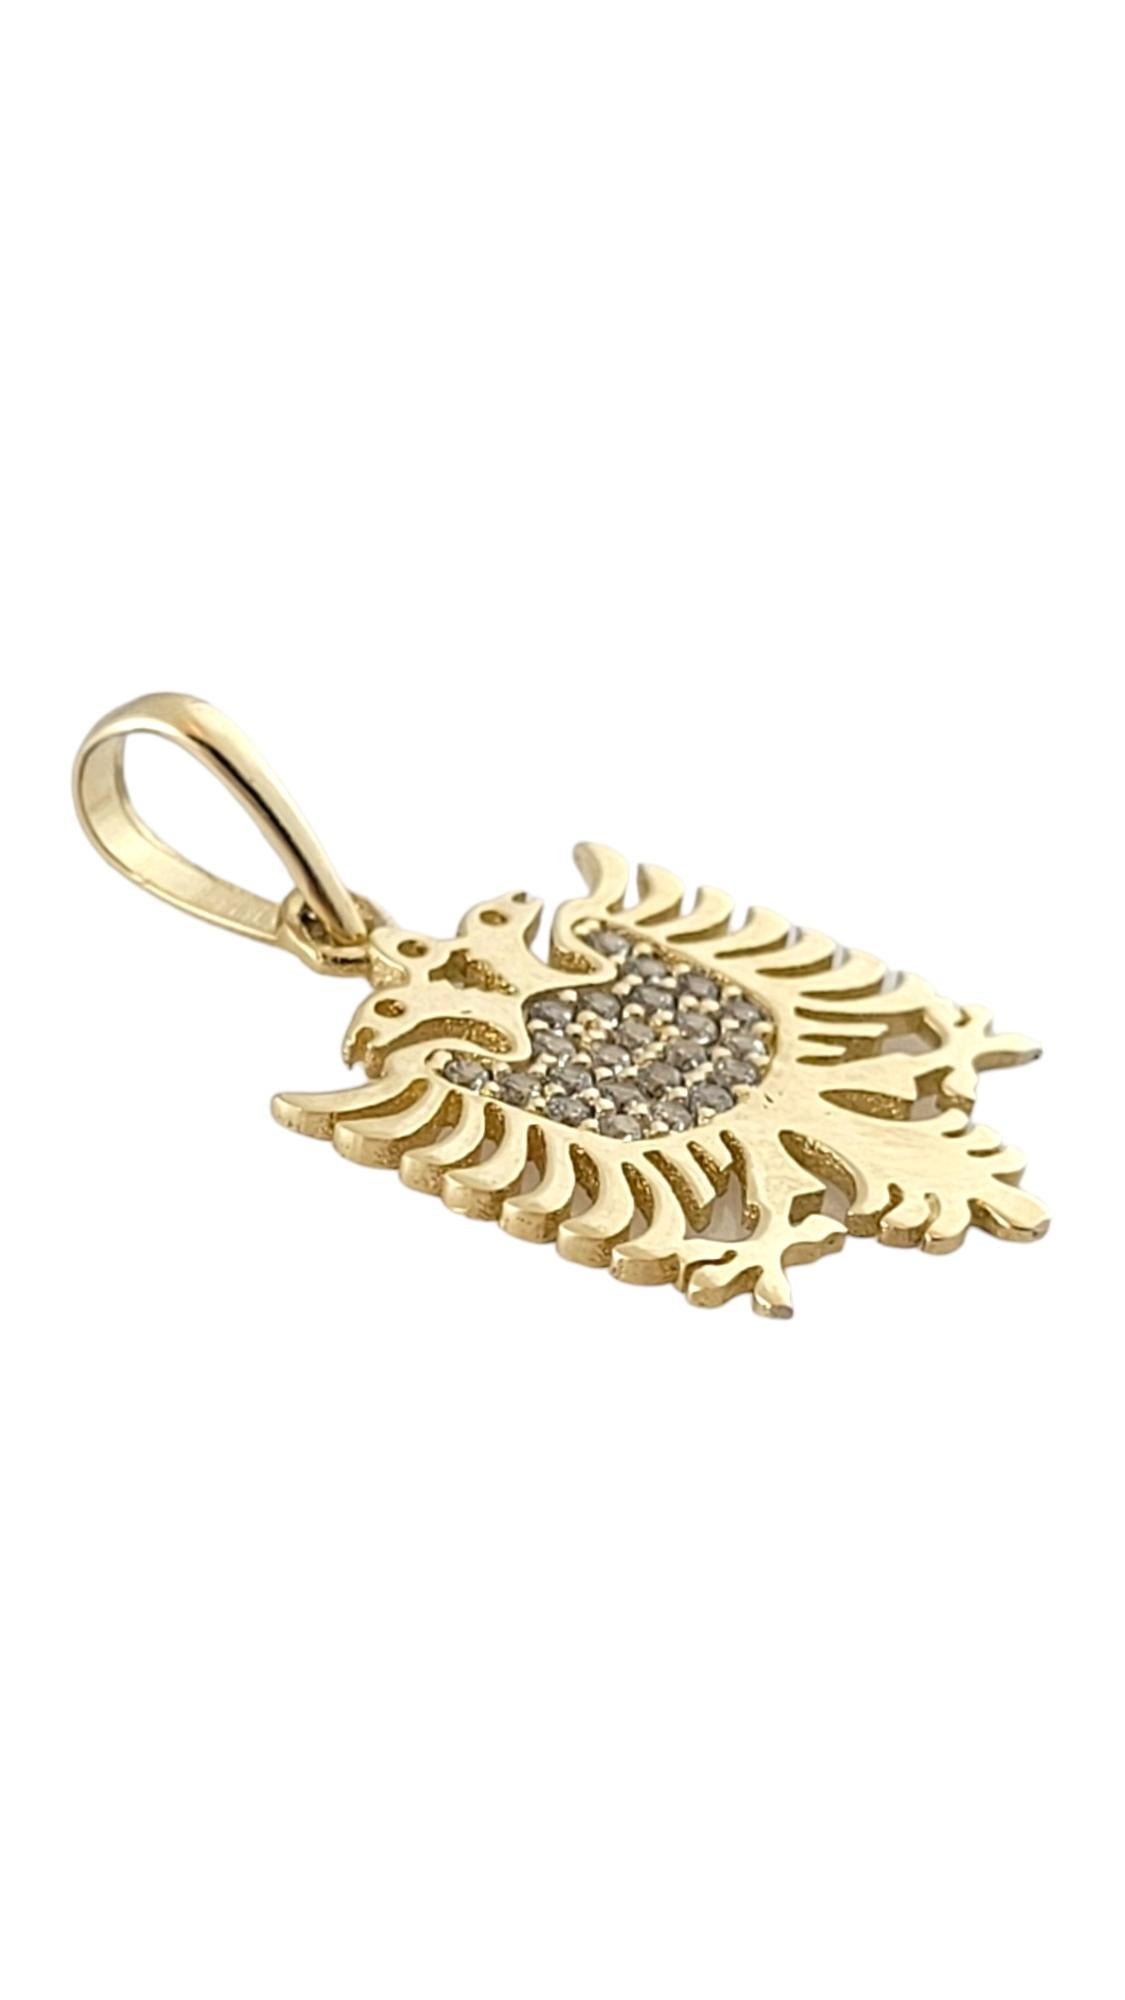 14K Yellow Gold Albanian Eagle Pendant 

This beautiful Albanian eagle pendant is crafted from 14K yellow gold and decorated with 23 sparkling clear stones!

Size: 22.27mm X 16.6mm X 1.08mm
Length w/ bail: 29.62mm

Weight: 1.47 dwt/ 2.29 g

Tested